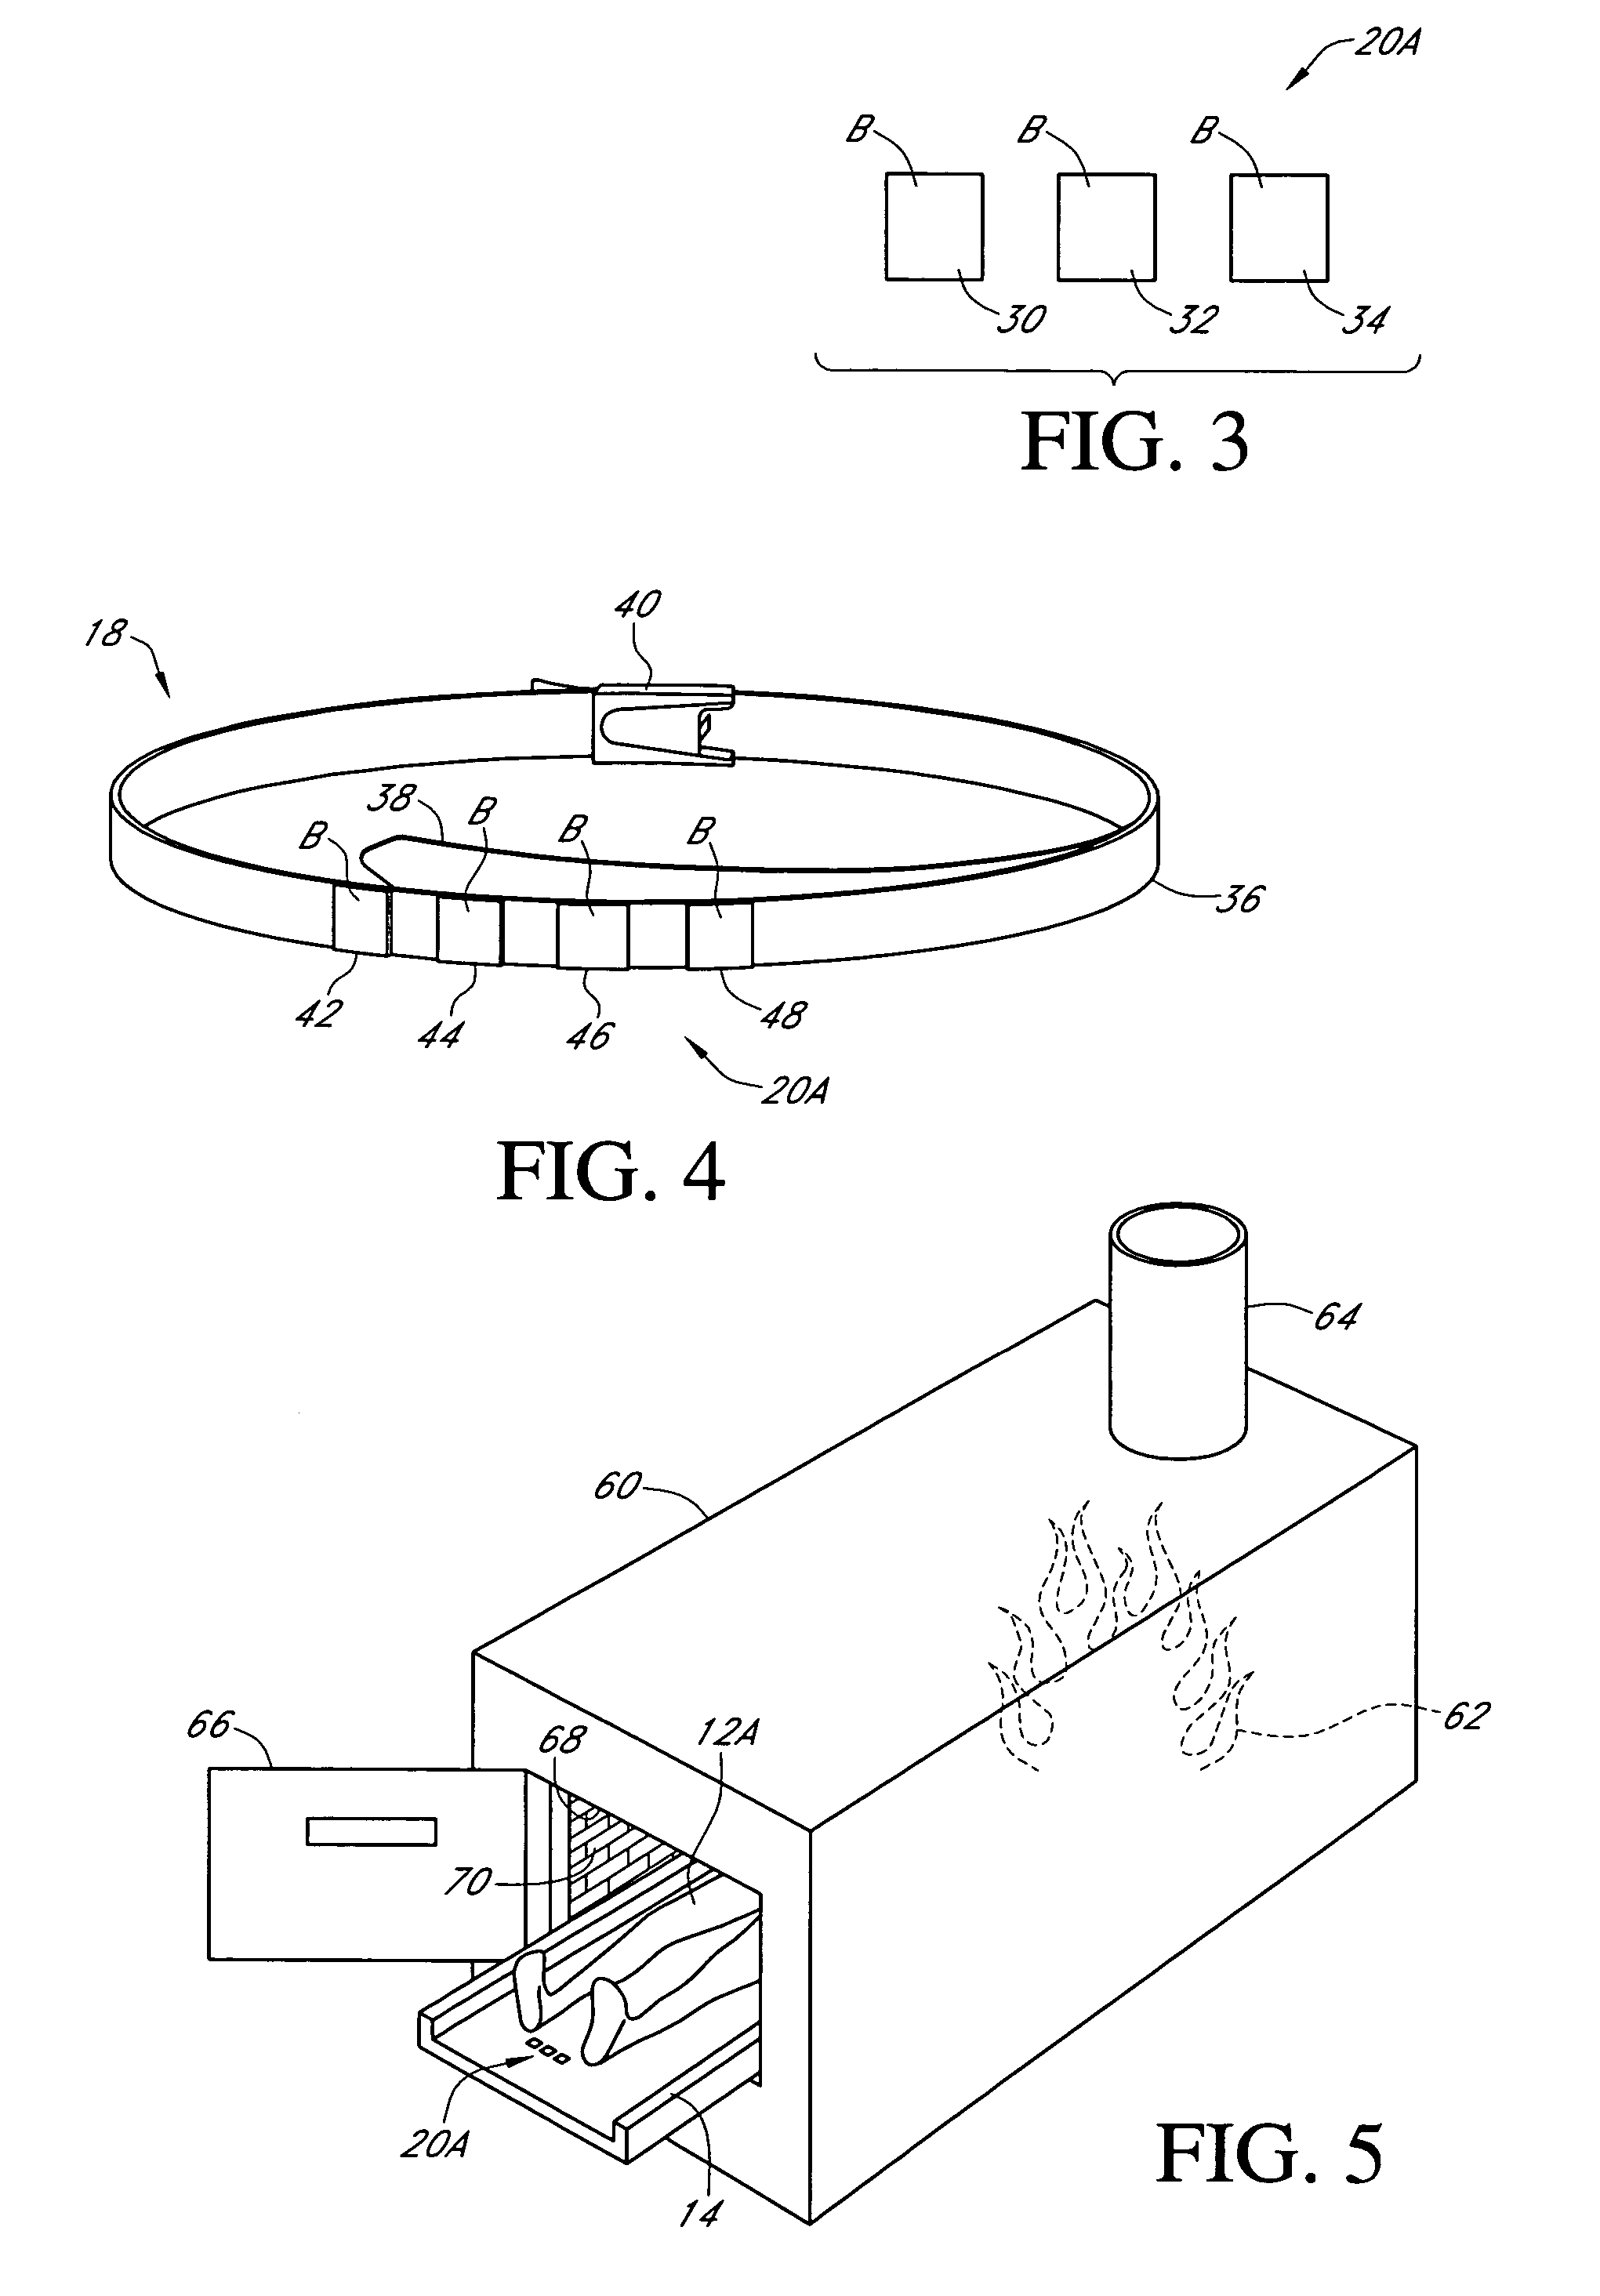 Synthetic biometric article and method for use of same